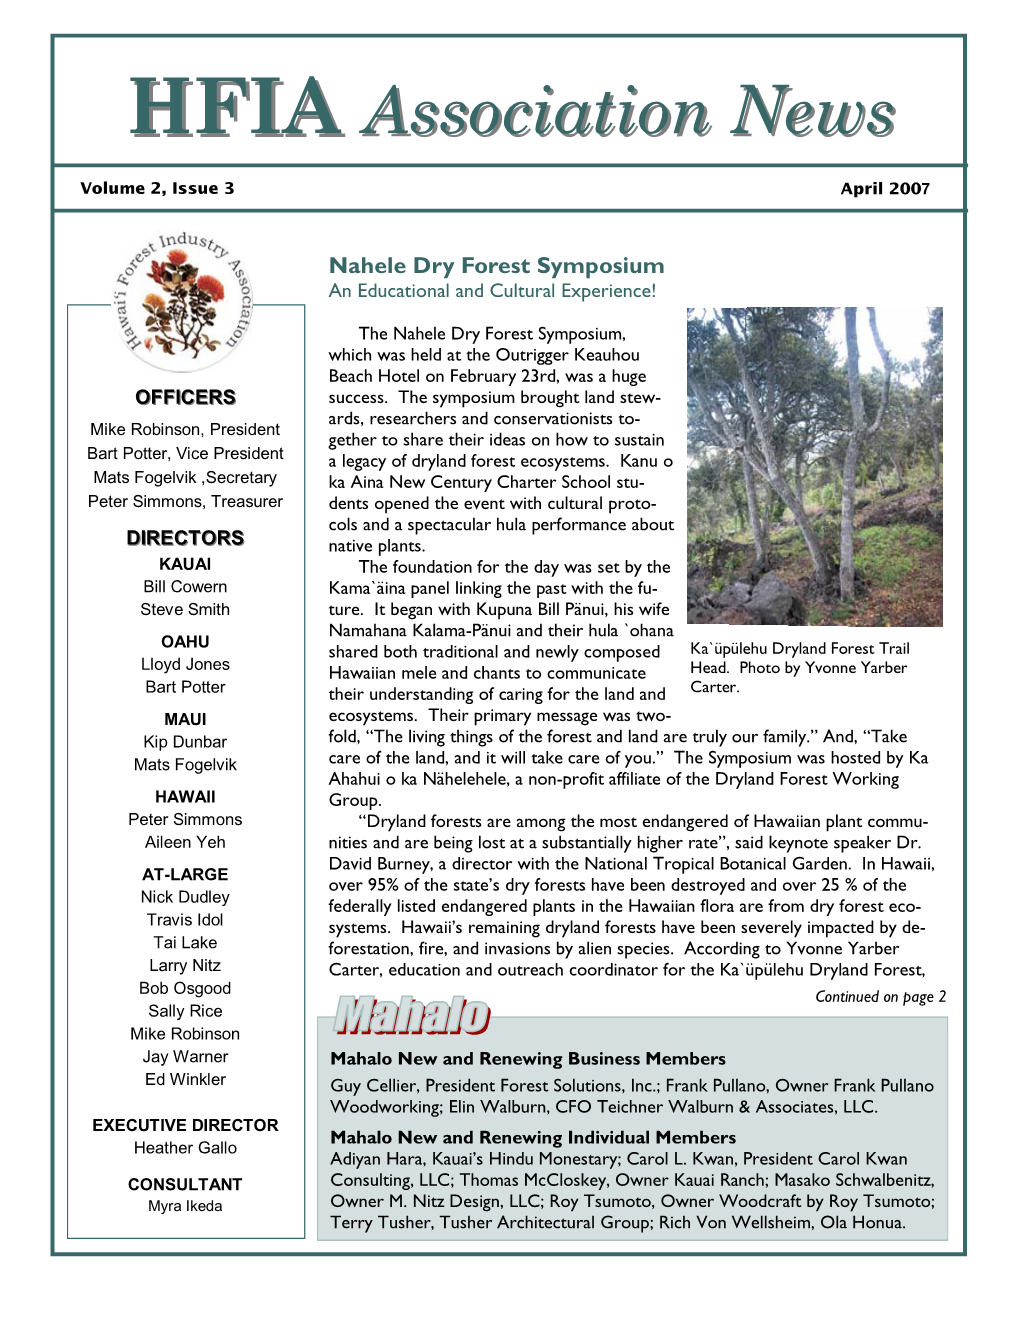 HFIA ASSOCIATION NEWS PAGE 2 International Tropical Timber Association (ITTO) Tropical Forest Update